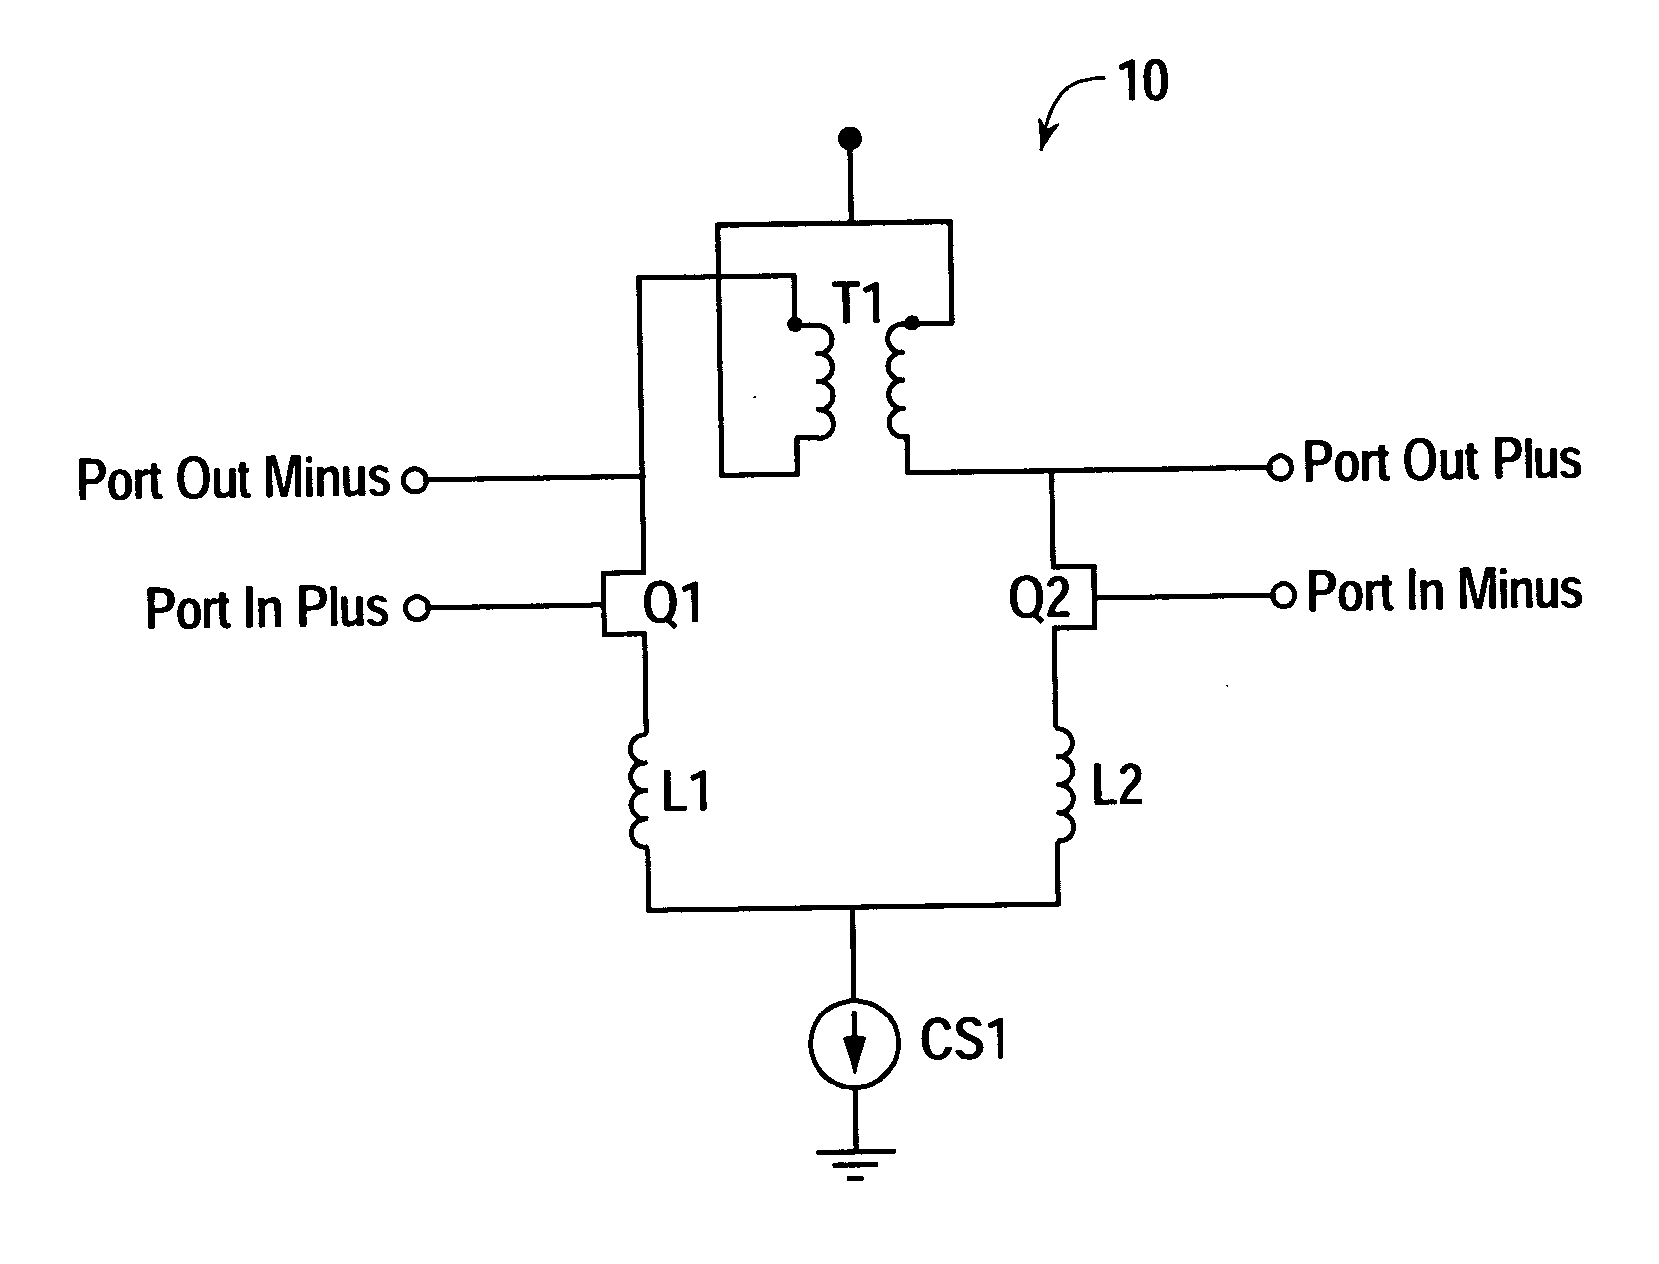 Coupled-inductance differential amplifier